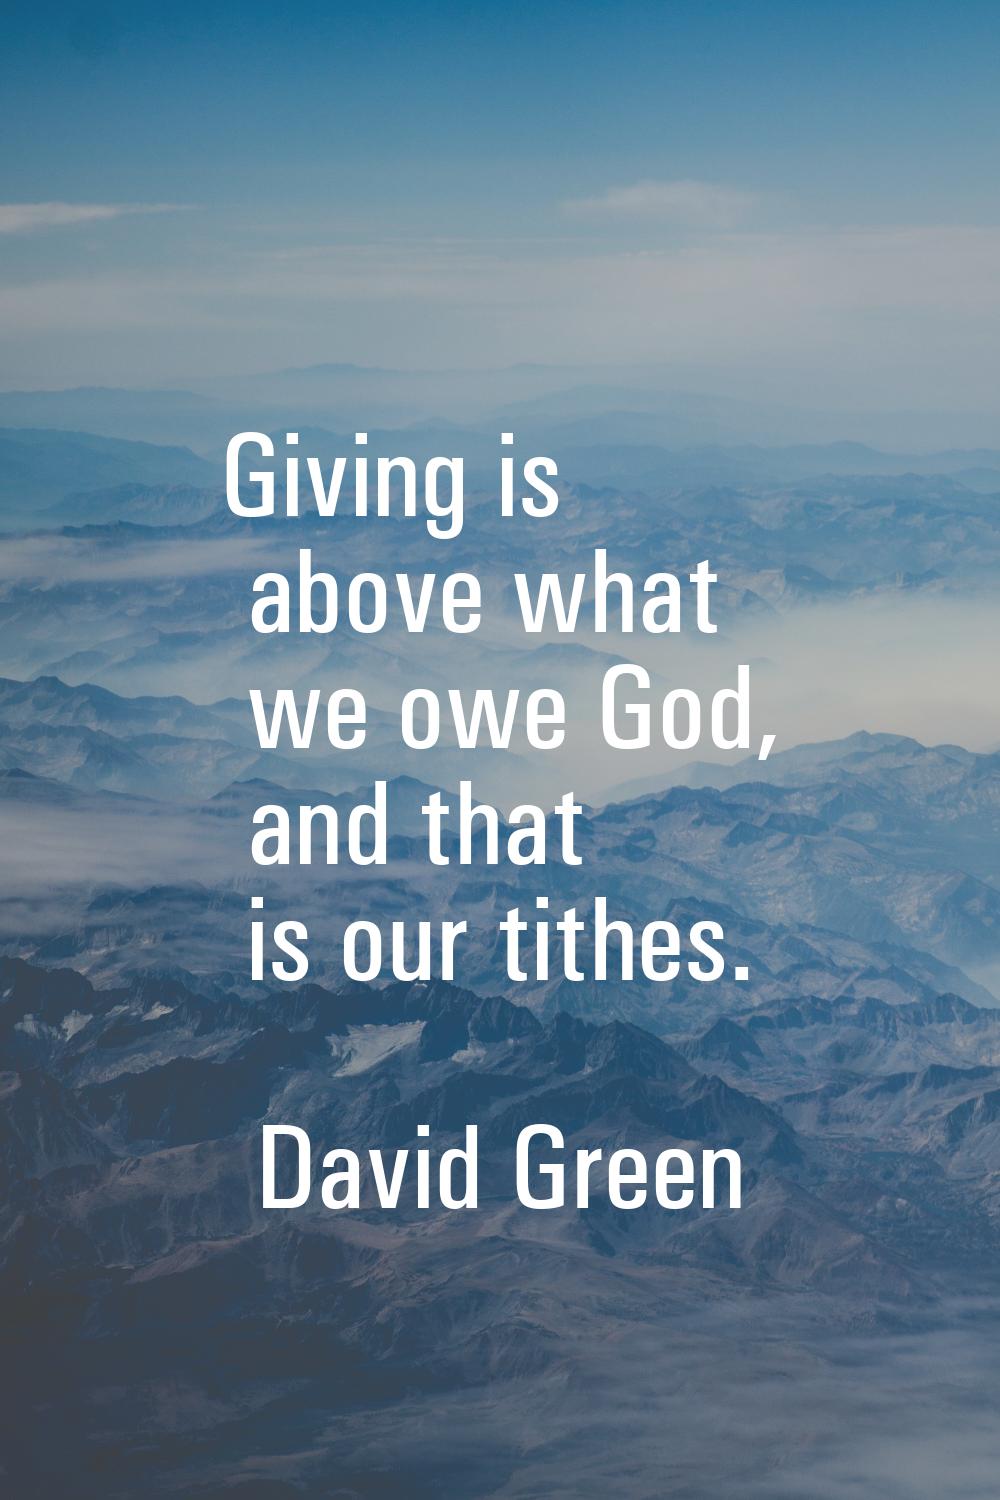 Giving is above what we owe God, and that is our tithes.